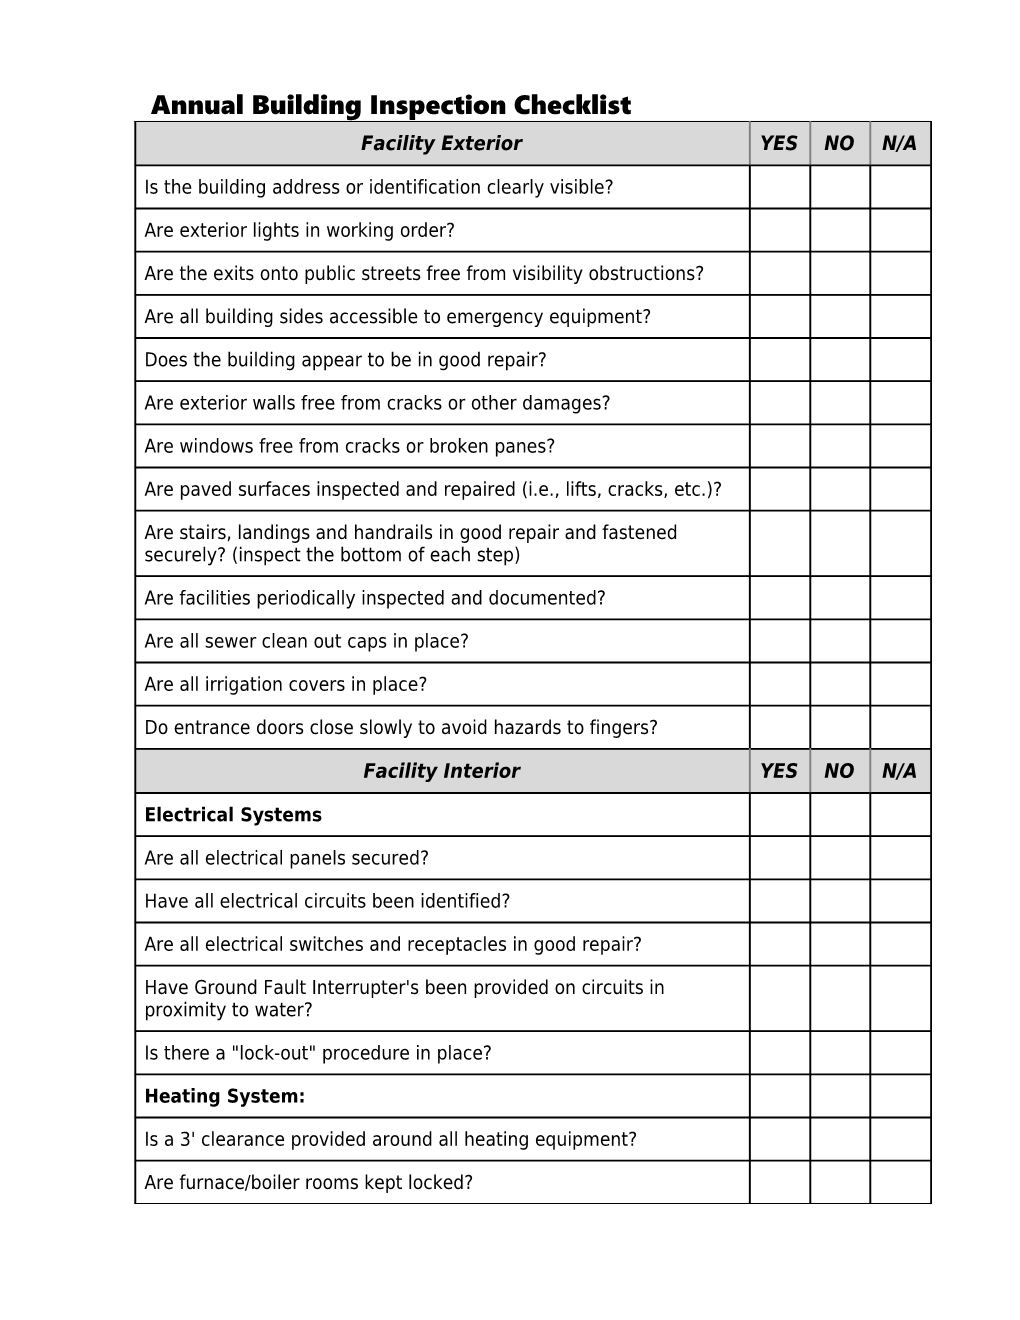 Annual Building Inspection Checklist